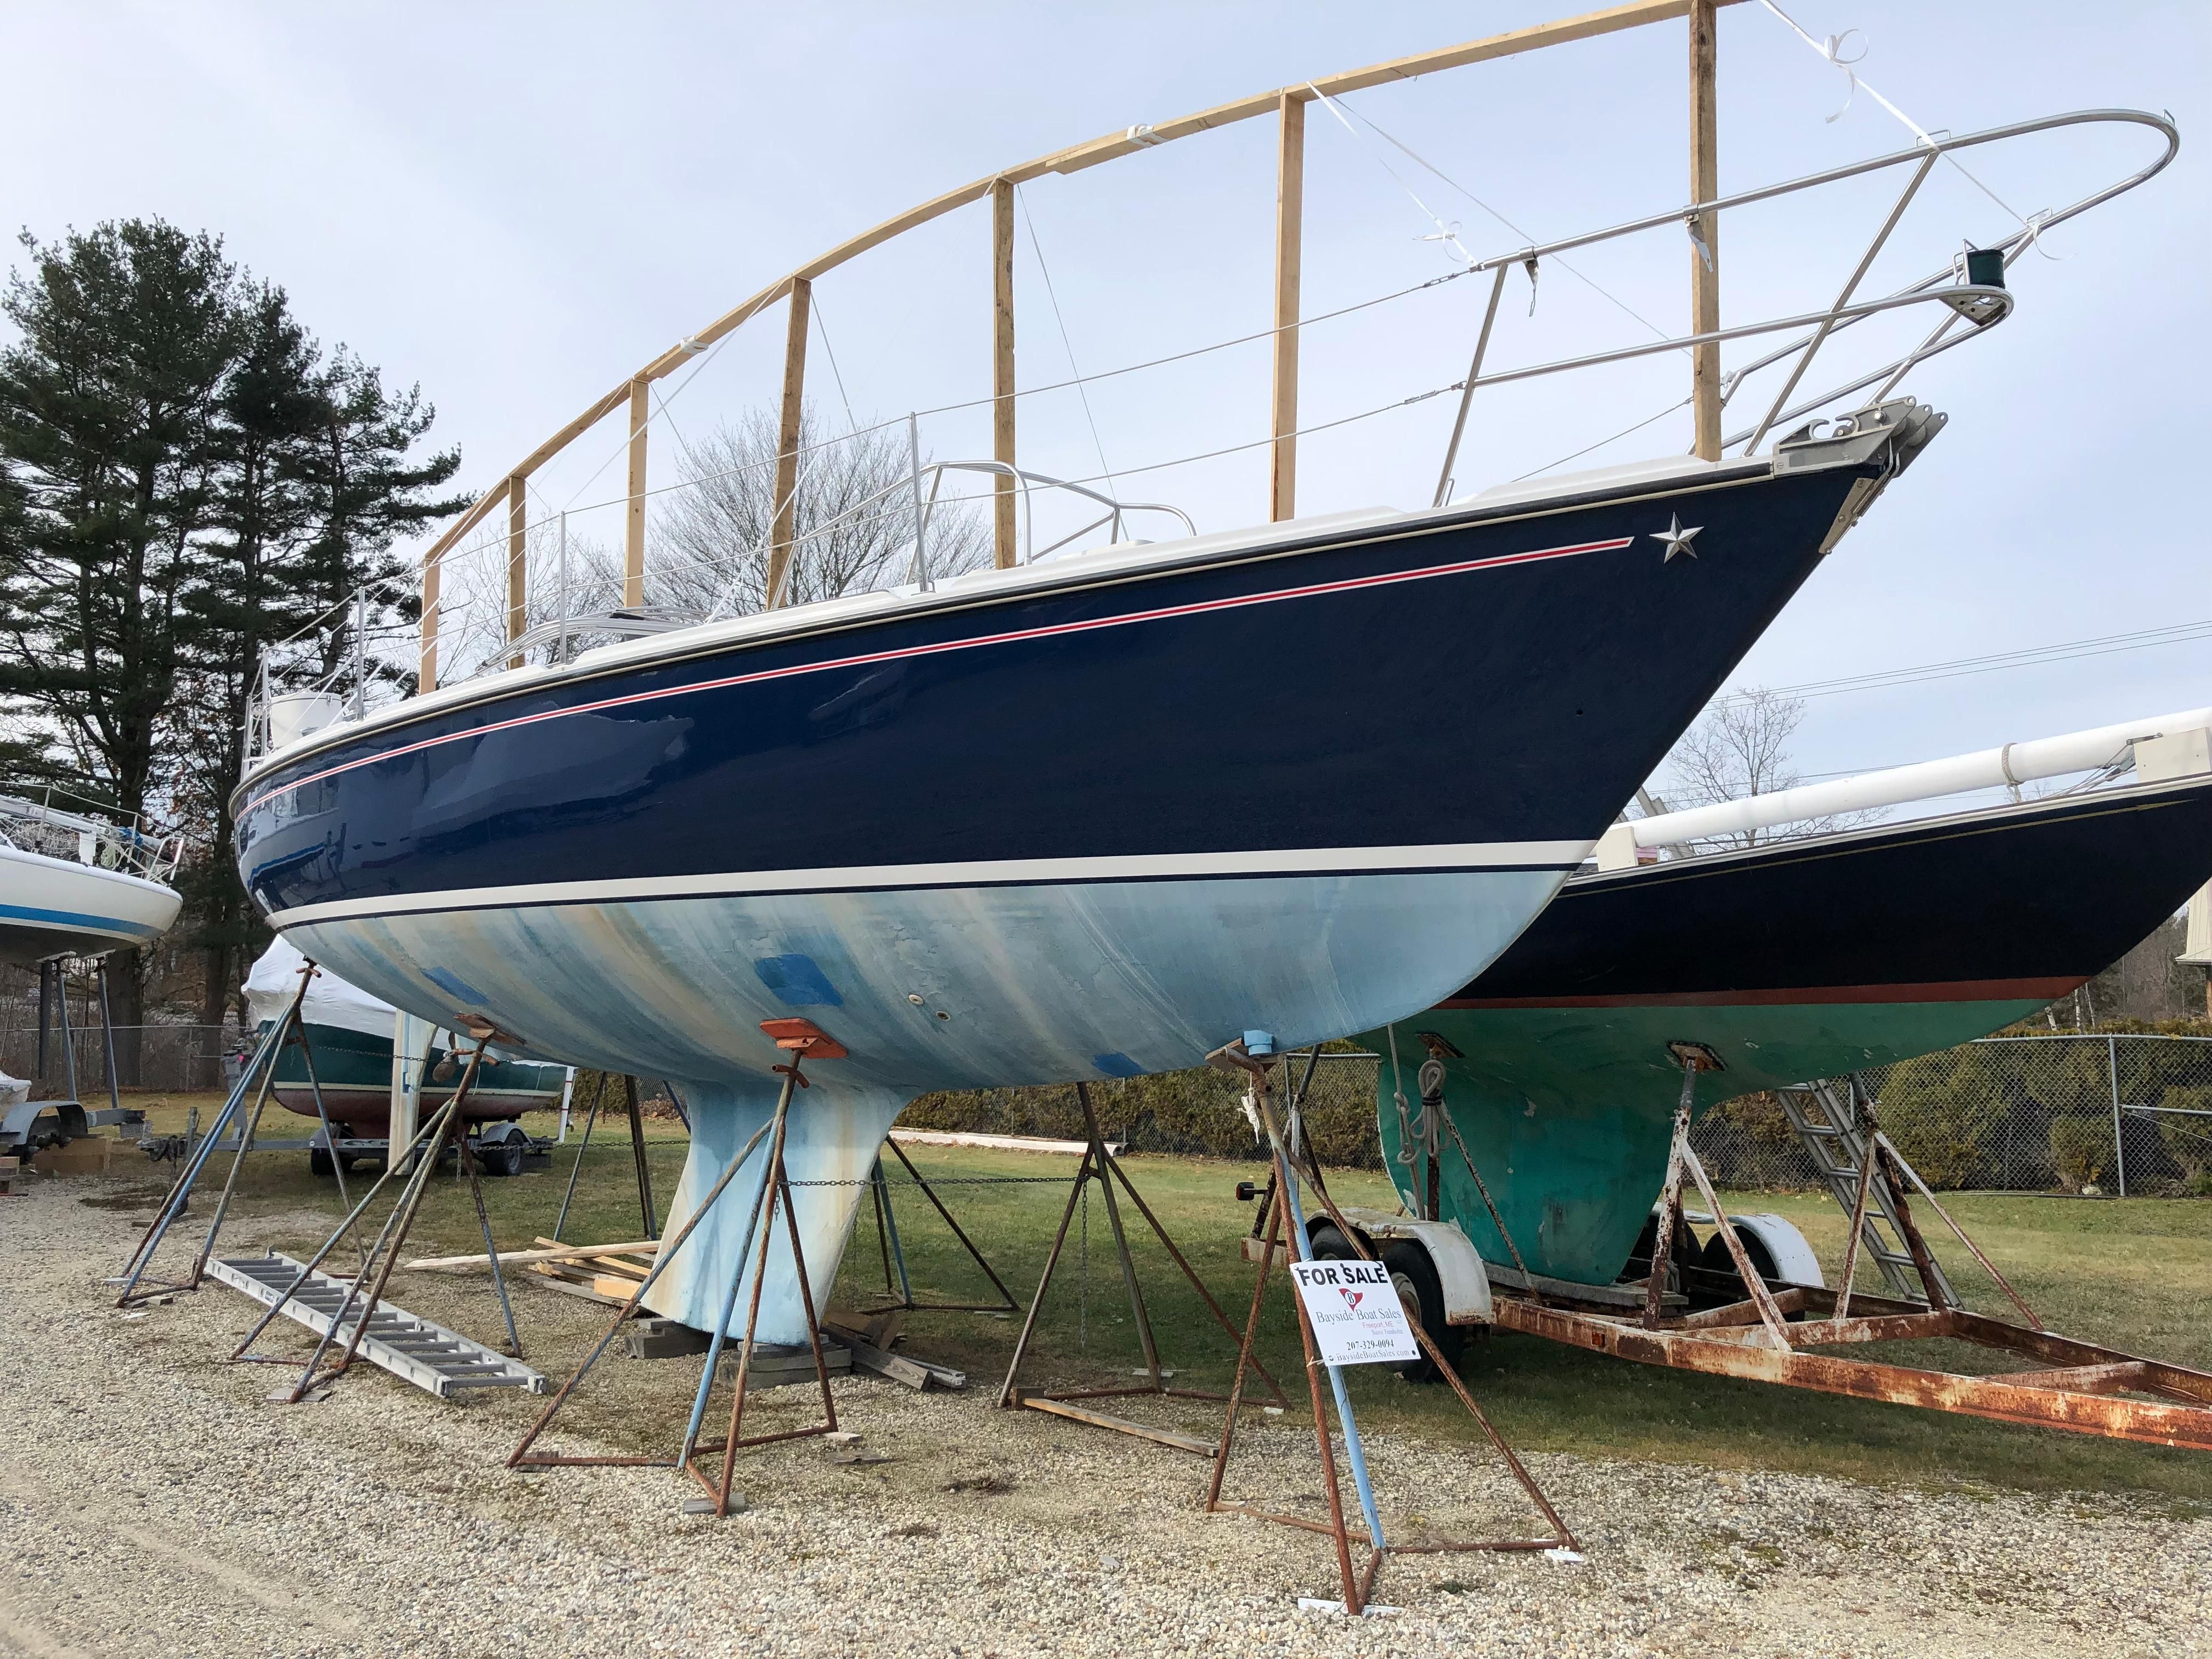 gin fizz yacht for sale